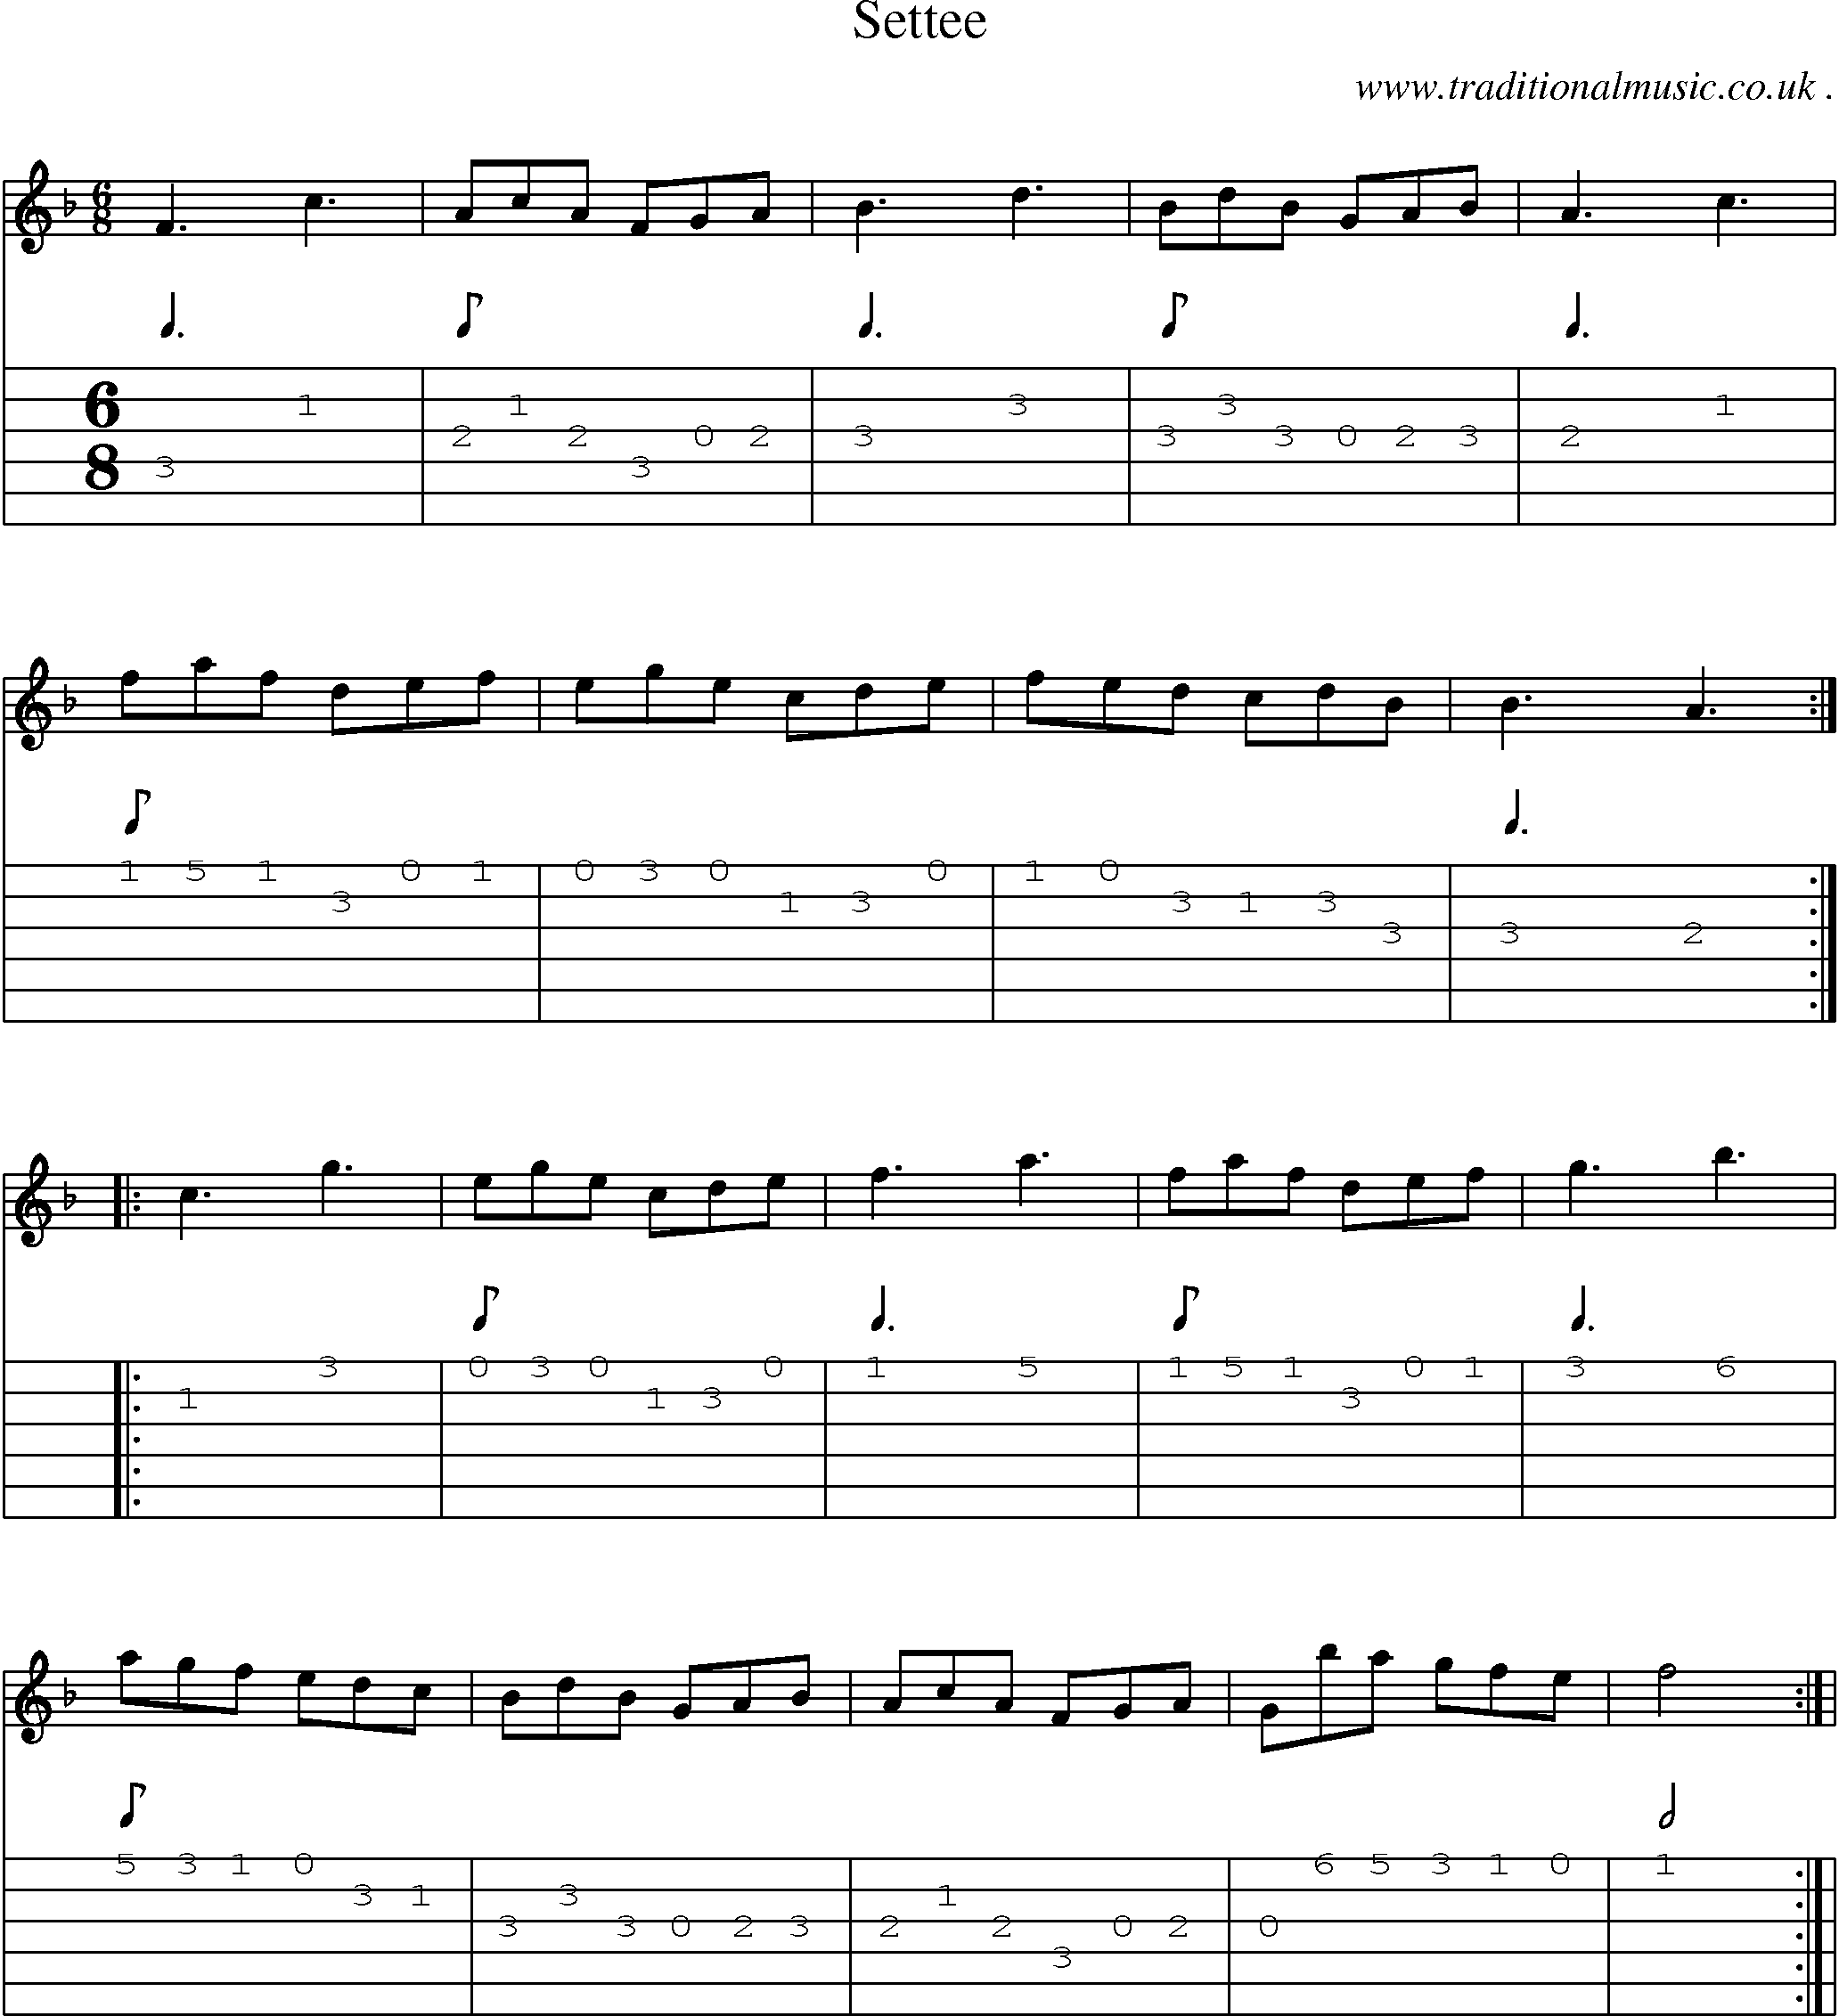 Sheet-Music and Guitar Tabs for Settee